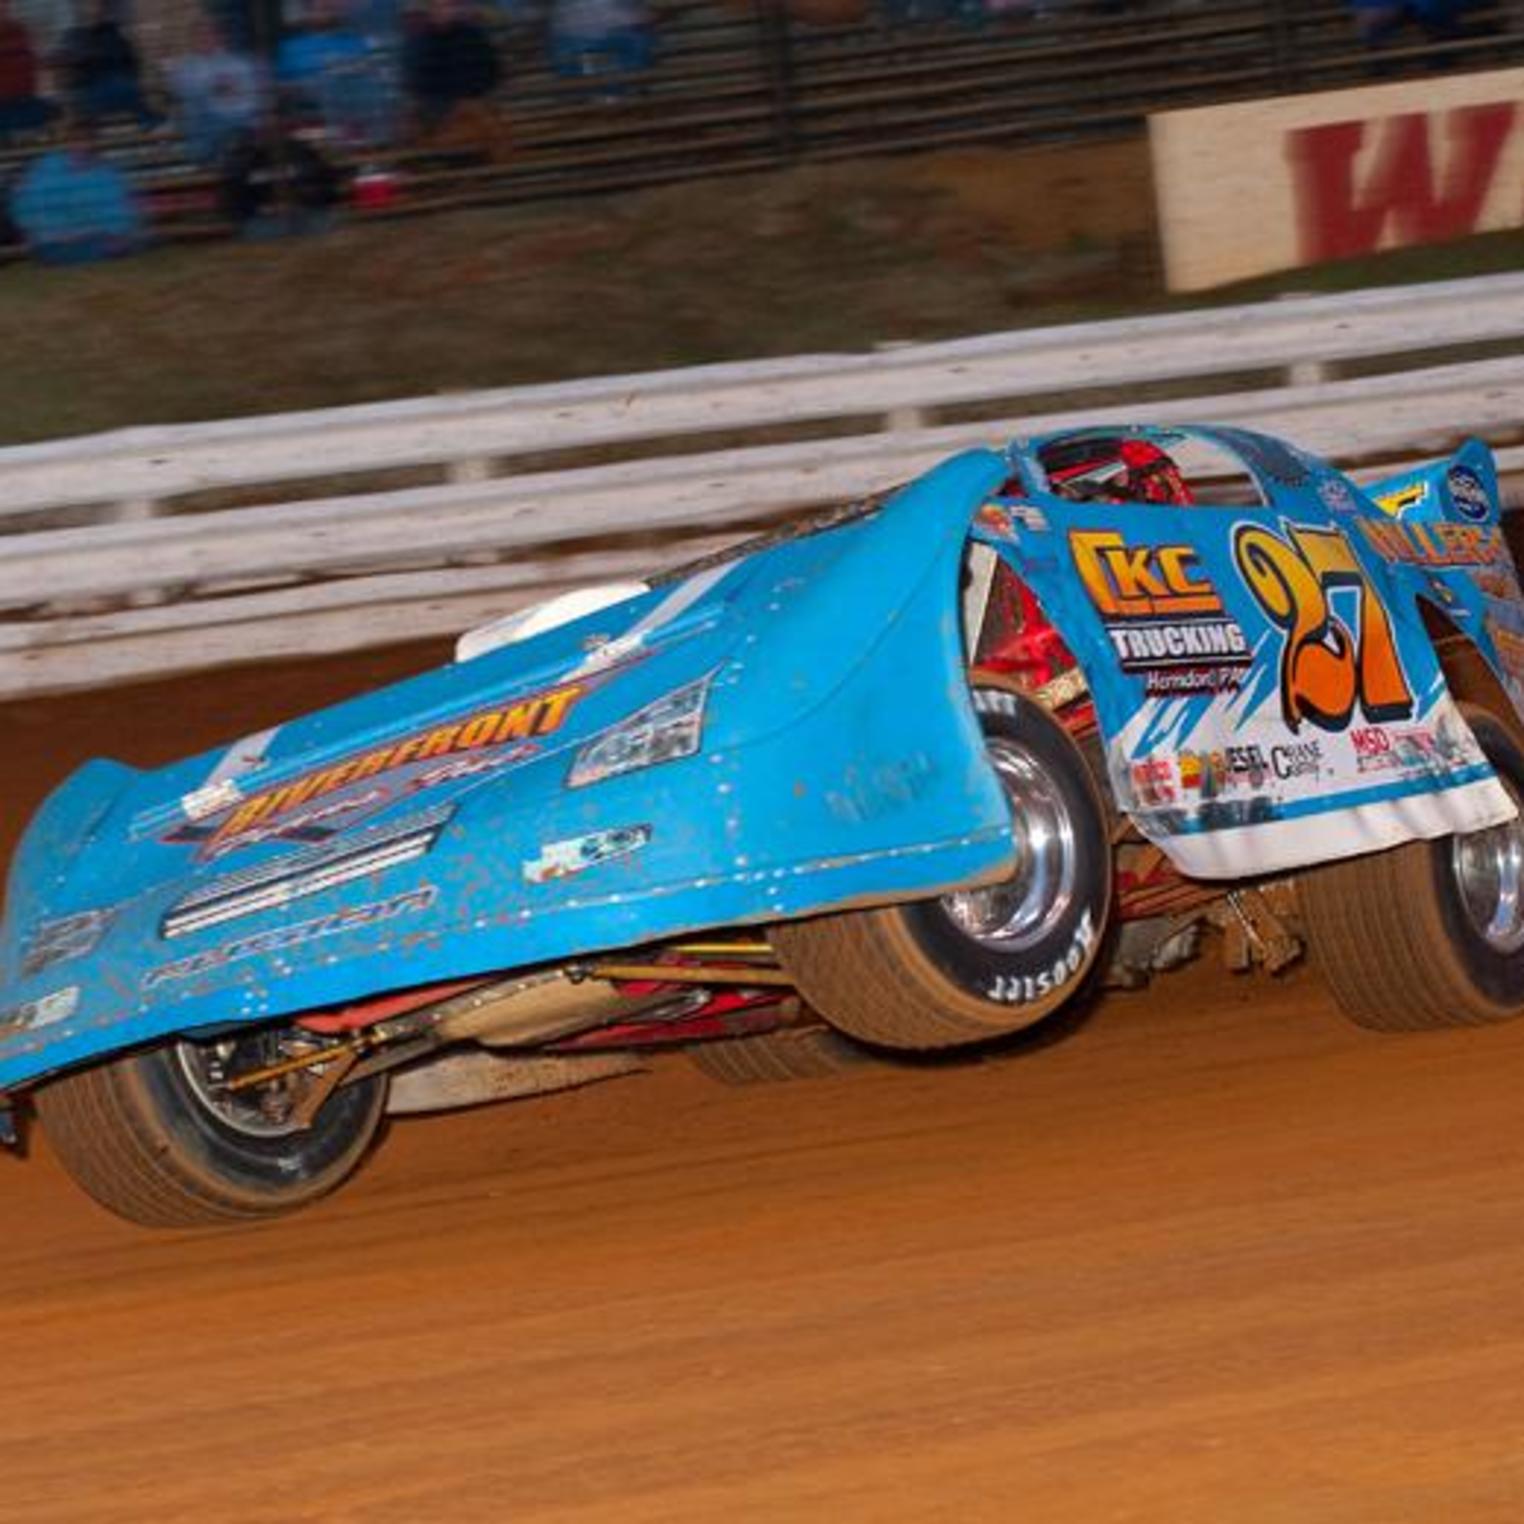 Late Model at Williams Grove Speedway